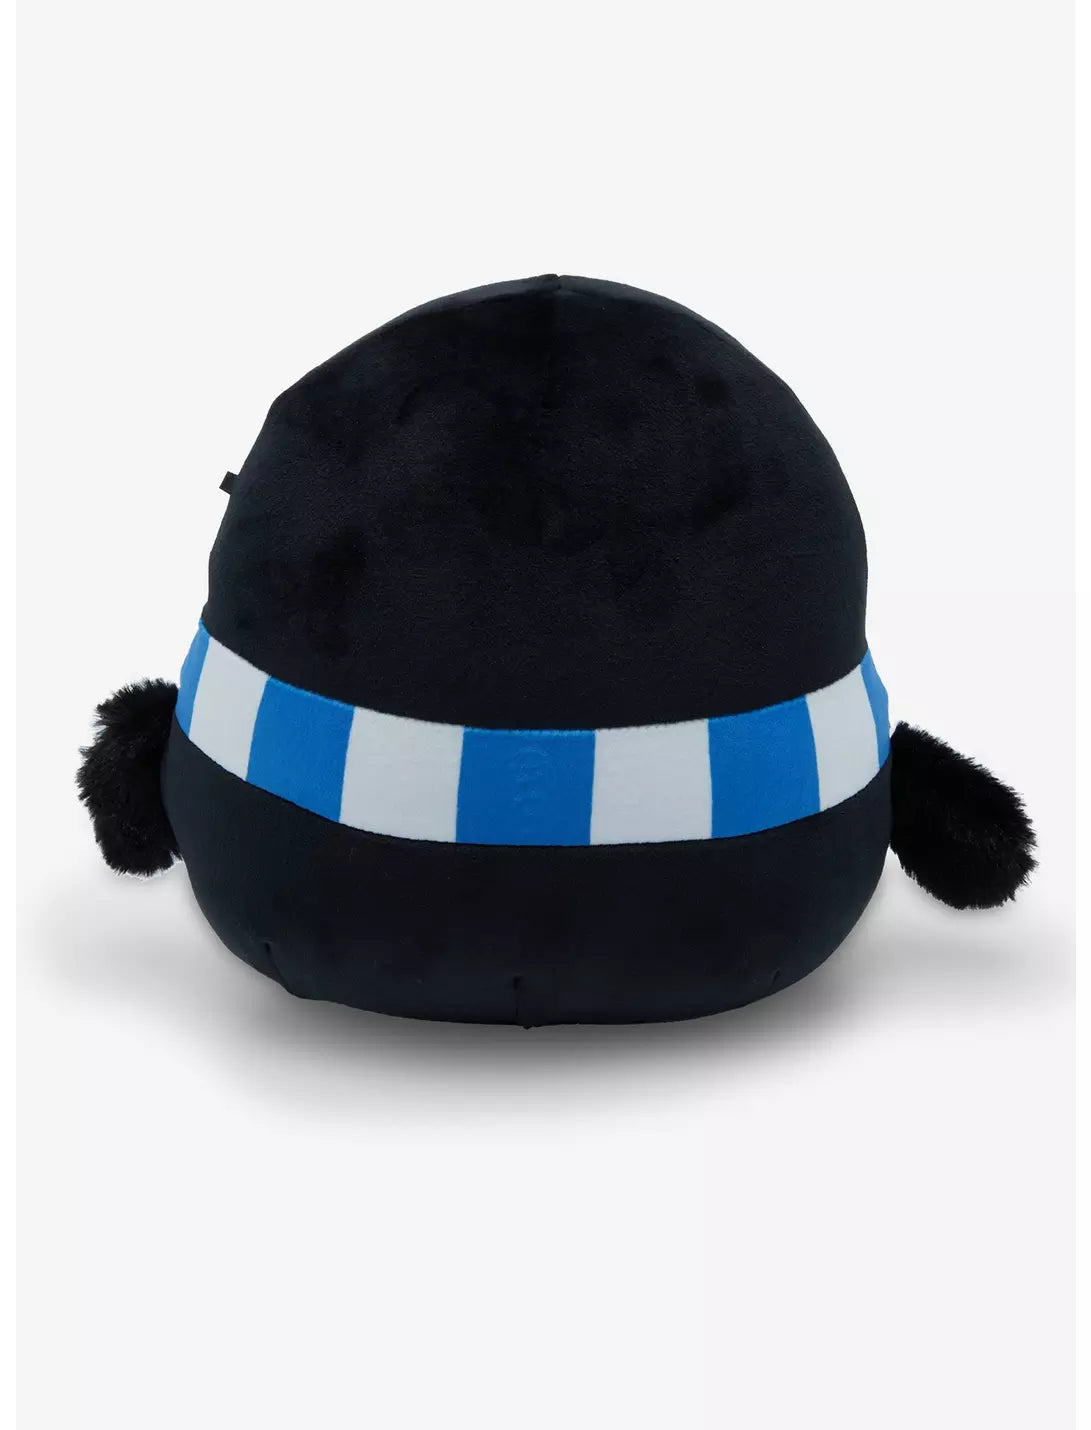 Peluche Squishmallows Harry Potter Ravenclaw